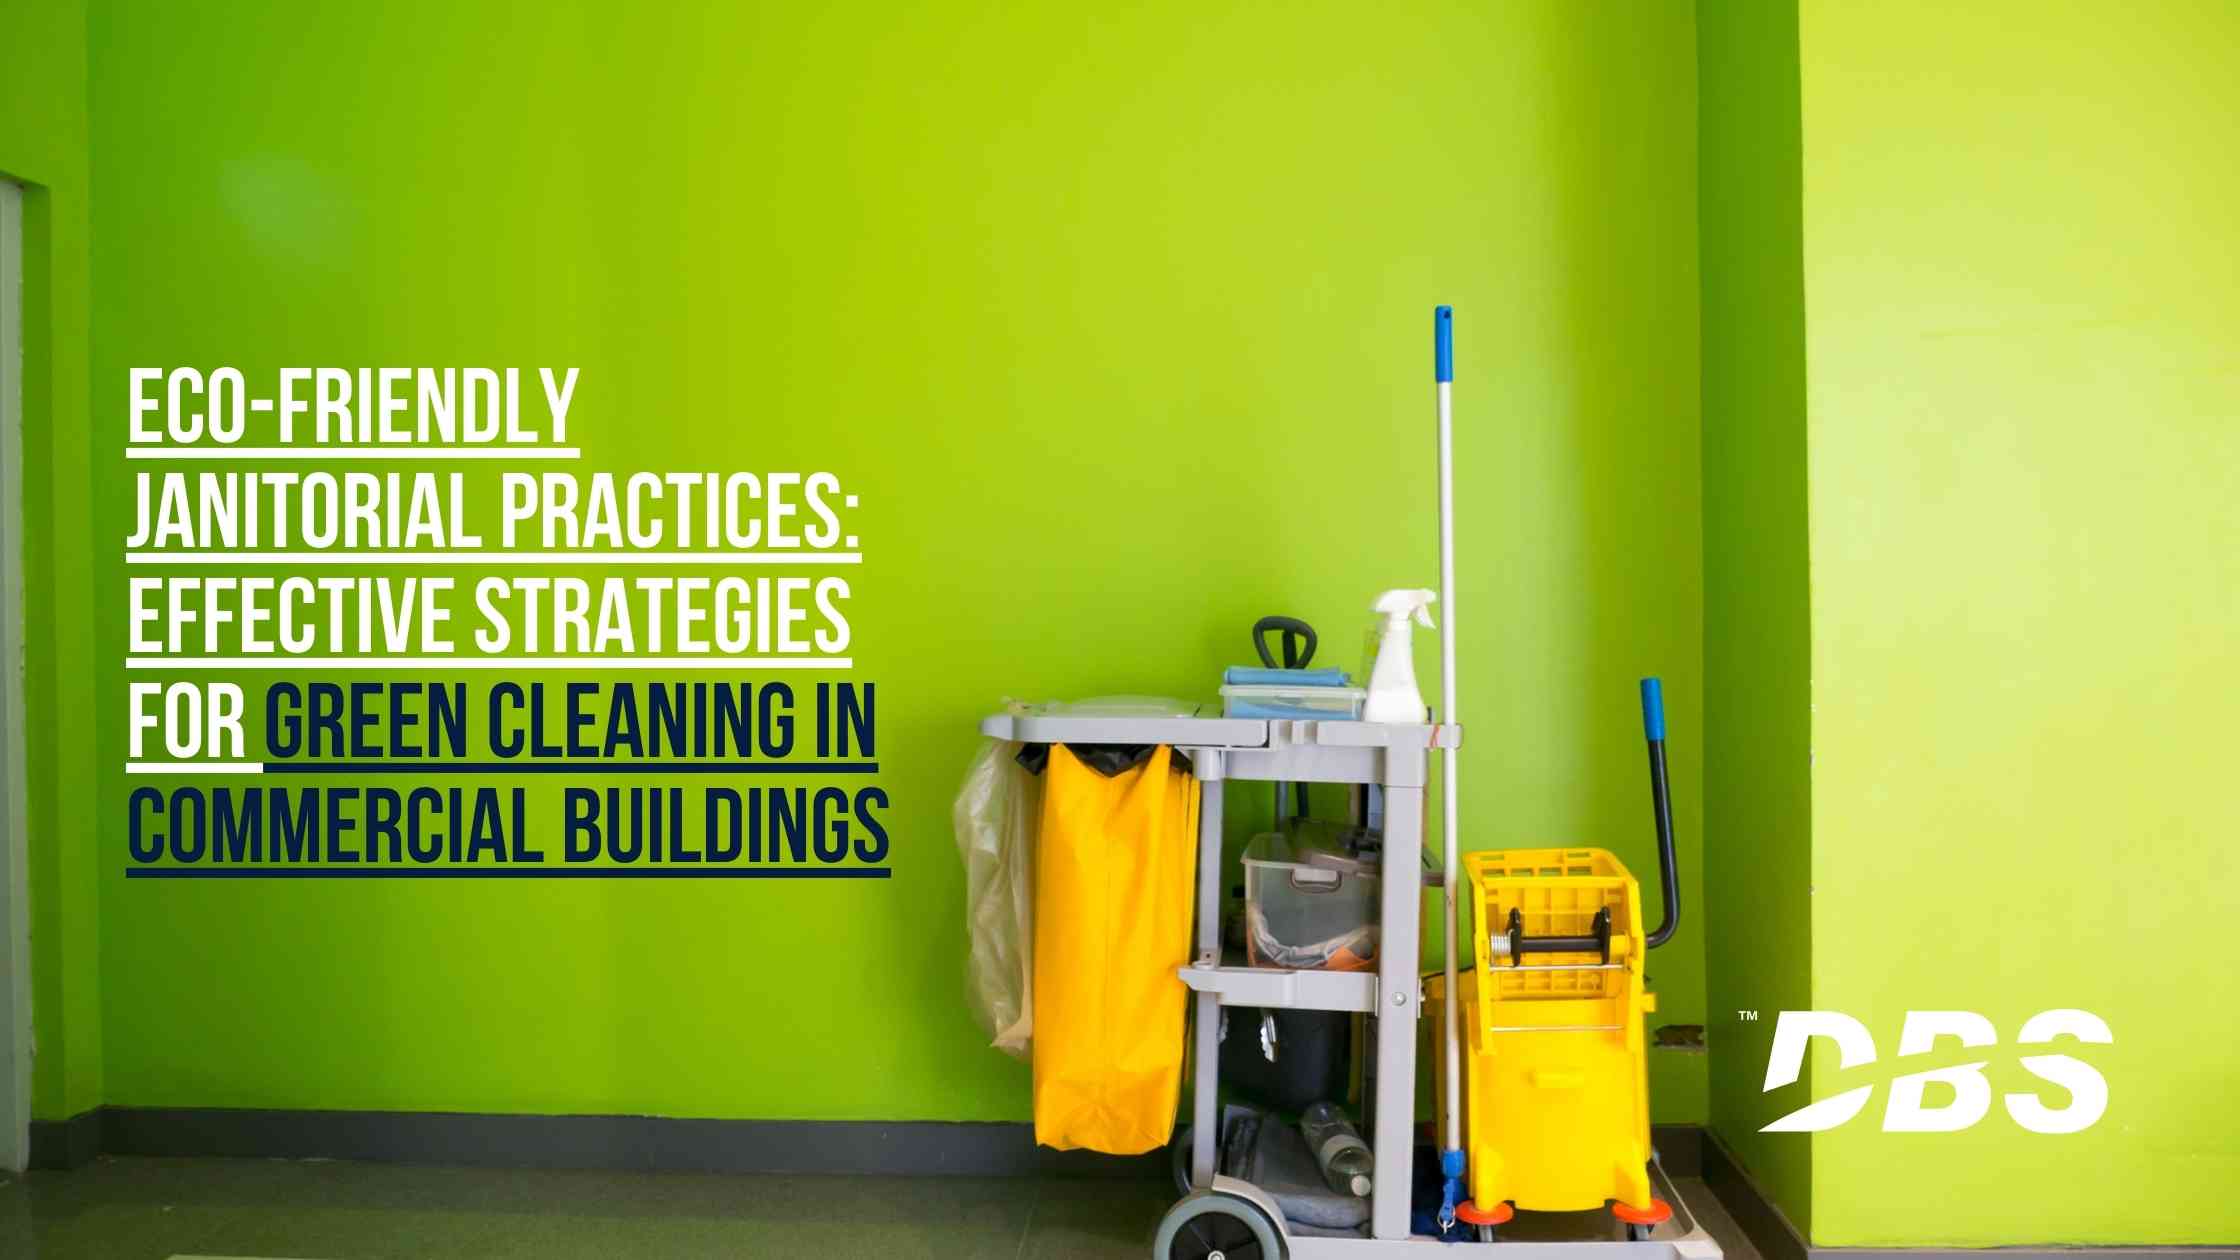 Eco-Friendly Janitorial Practices: Effective Strategies for Green Cleaning in Commercial Buildings